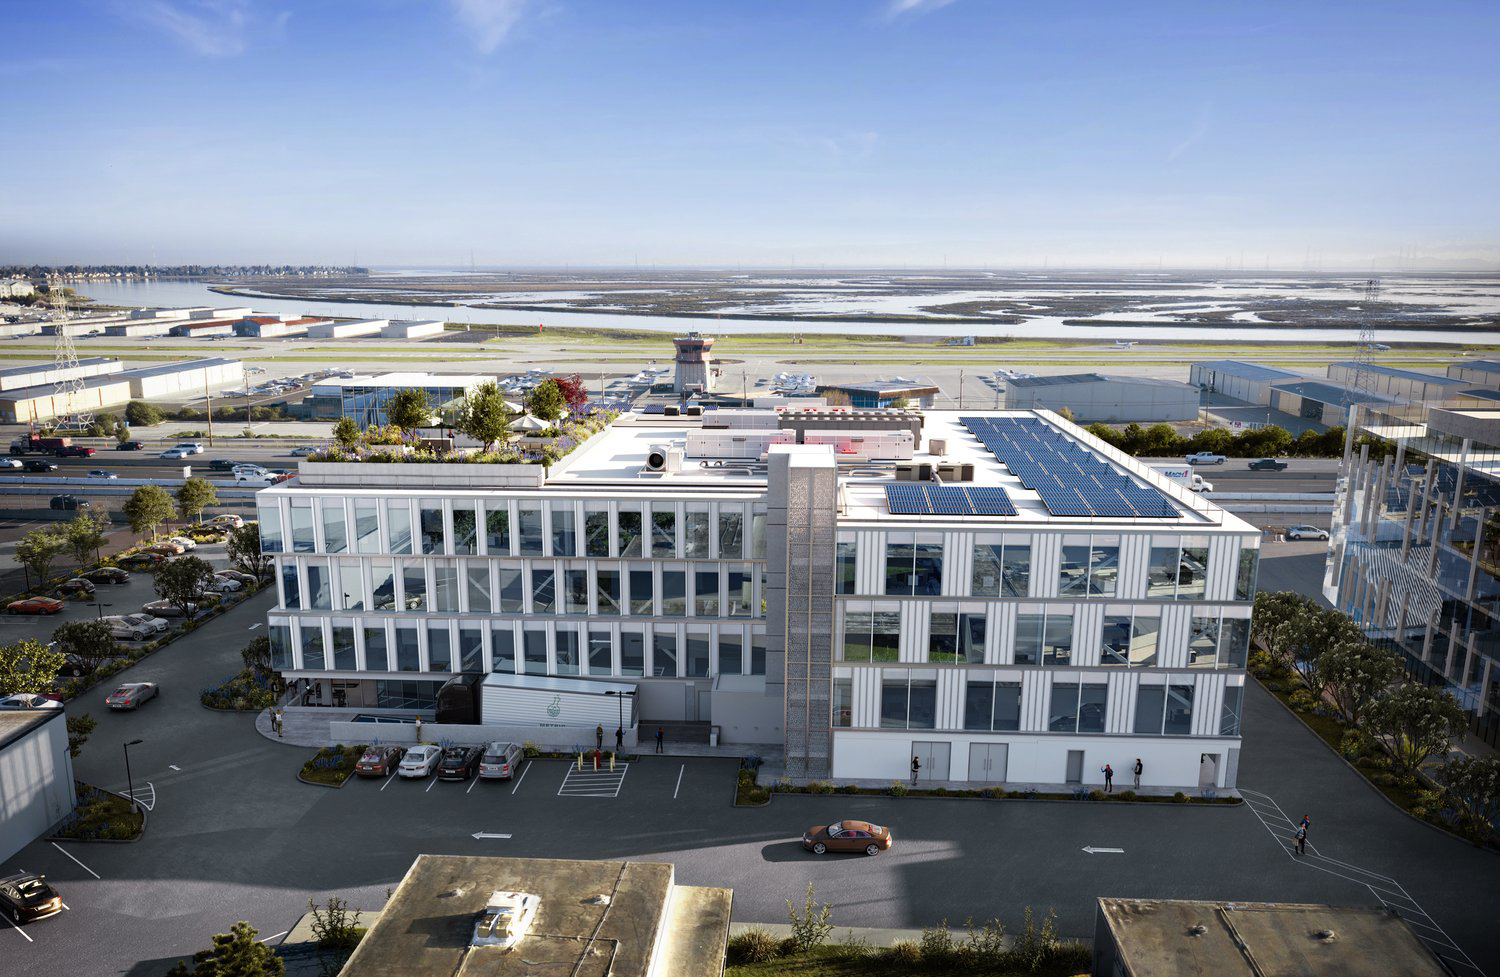 777 Industrial Road with the San Carlos Airport visible in the background, rendering by Stanton Architecture